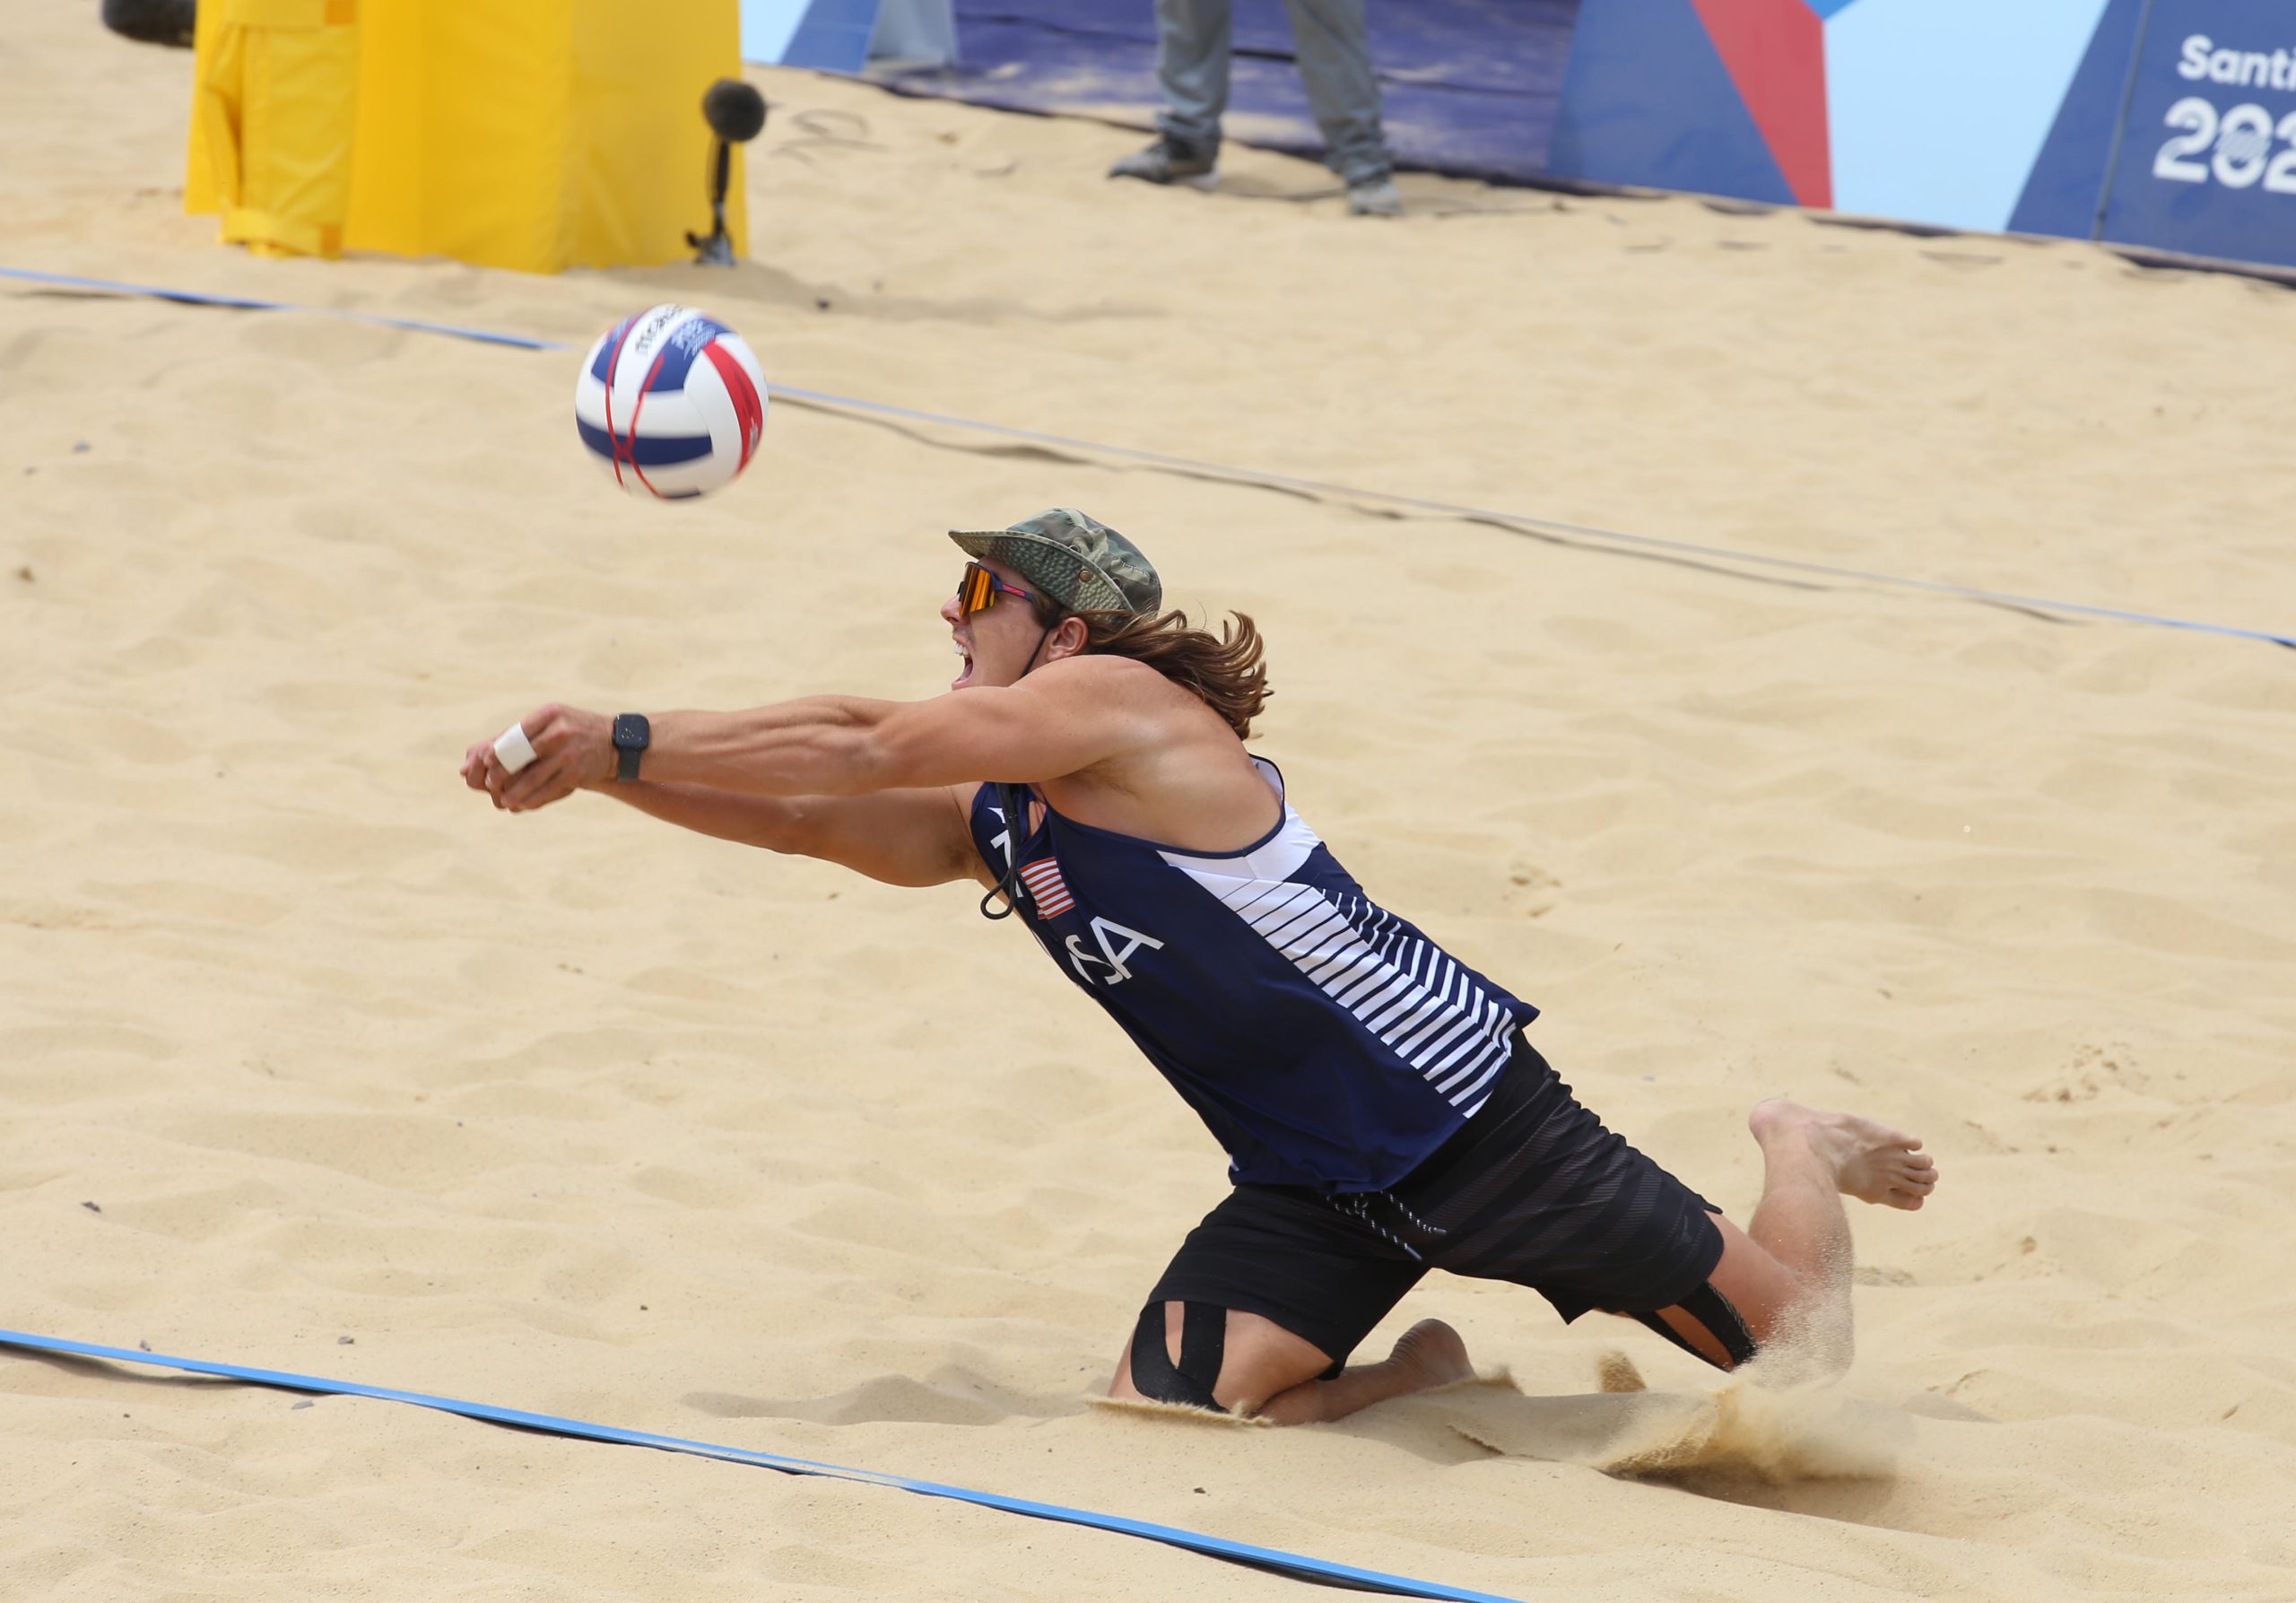 Cuba against USA and Chile versus Brazil in Men’s Beach Volleyball Semifinals